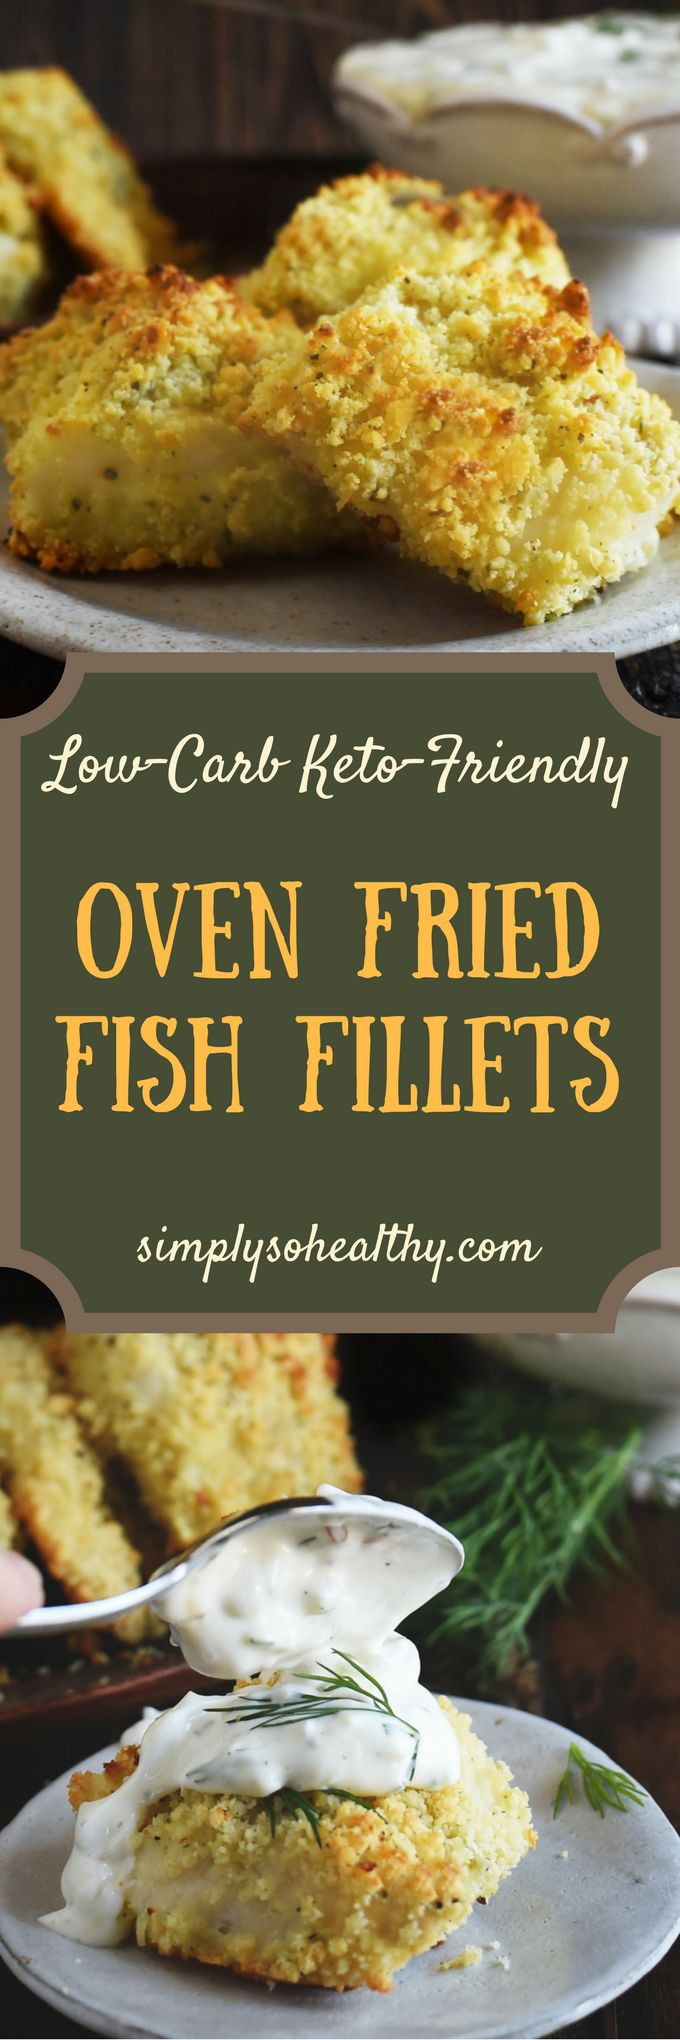 Low Carb Baked Fish Recipes
 417 best LOW CARB FISH & SEAFOOD RECIPES Low Carb & Keto